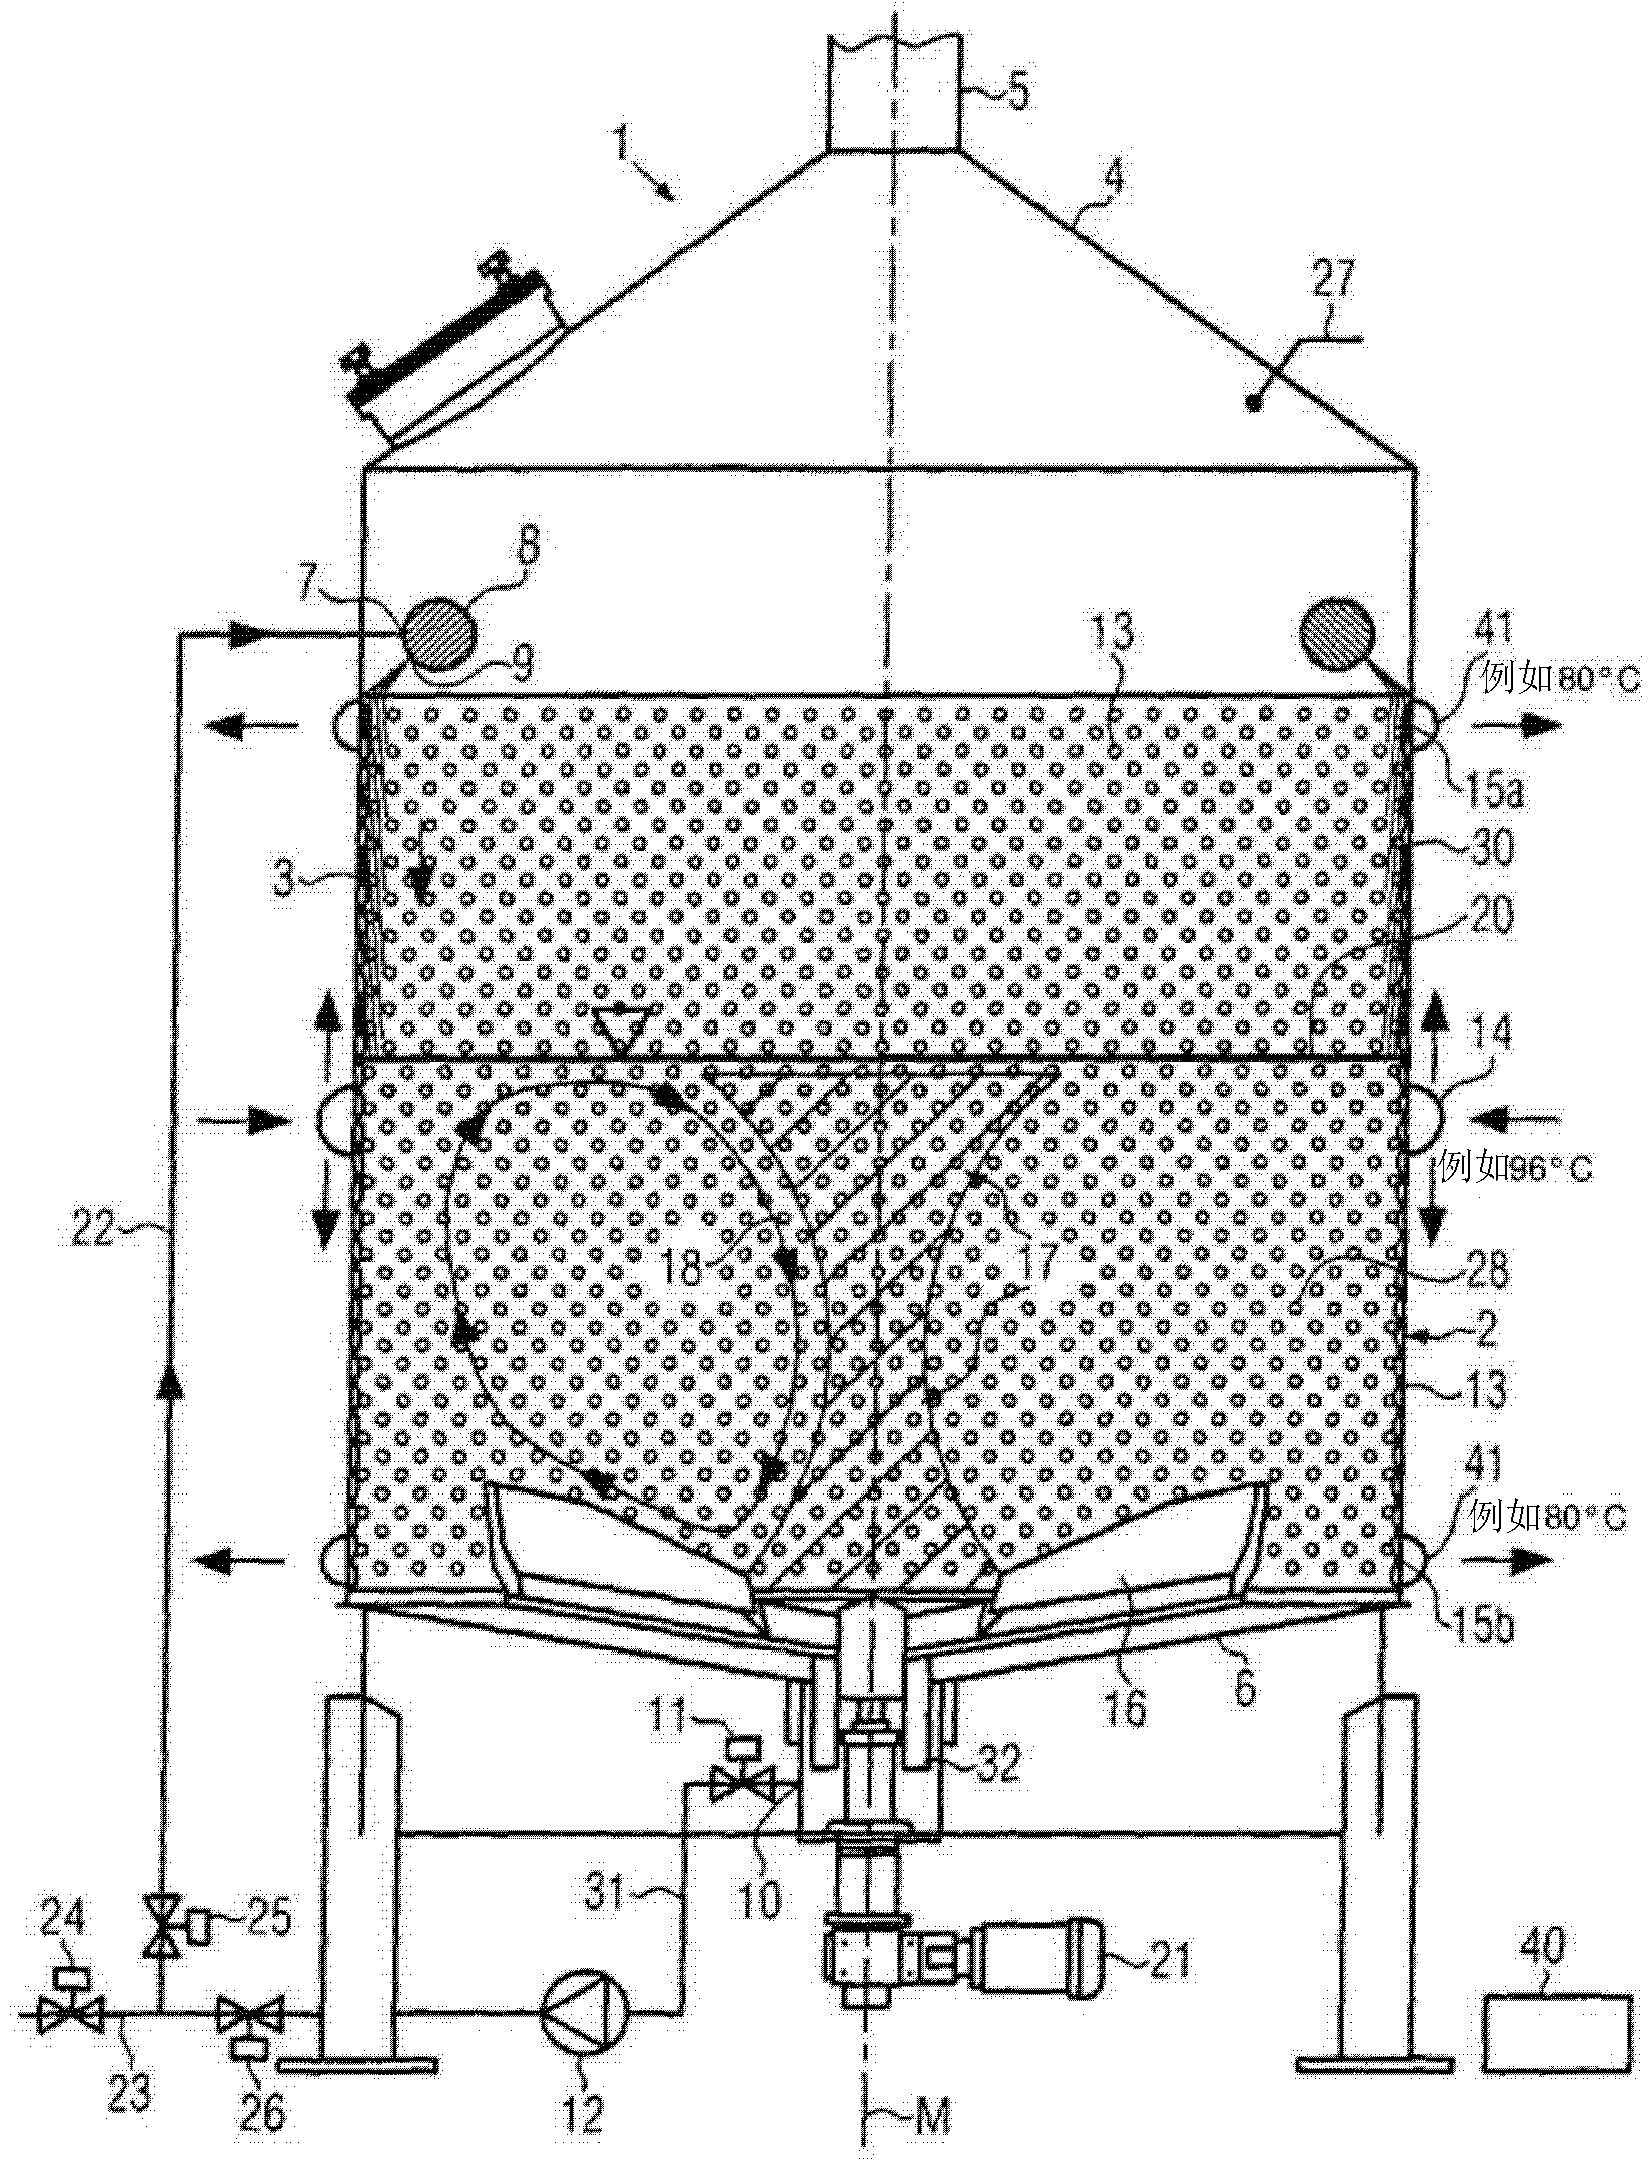 Method and device in particular for mashing in the production of beer